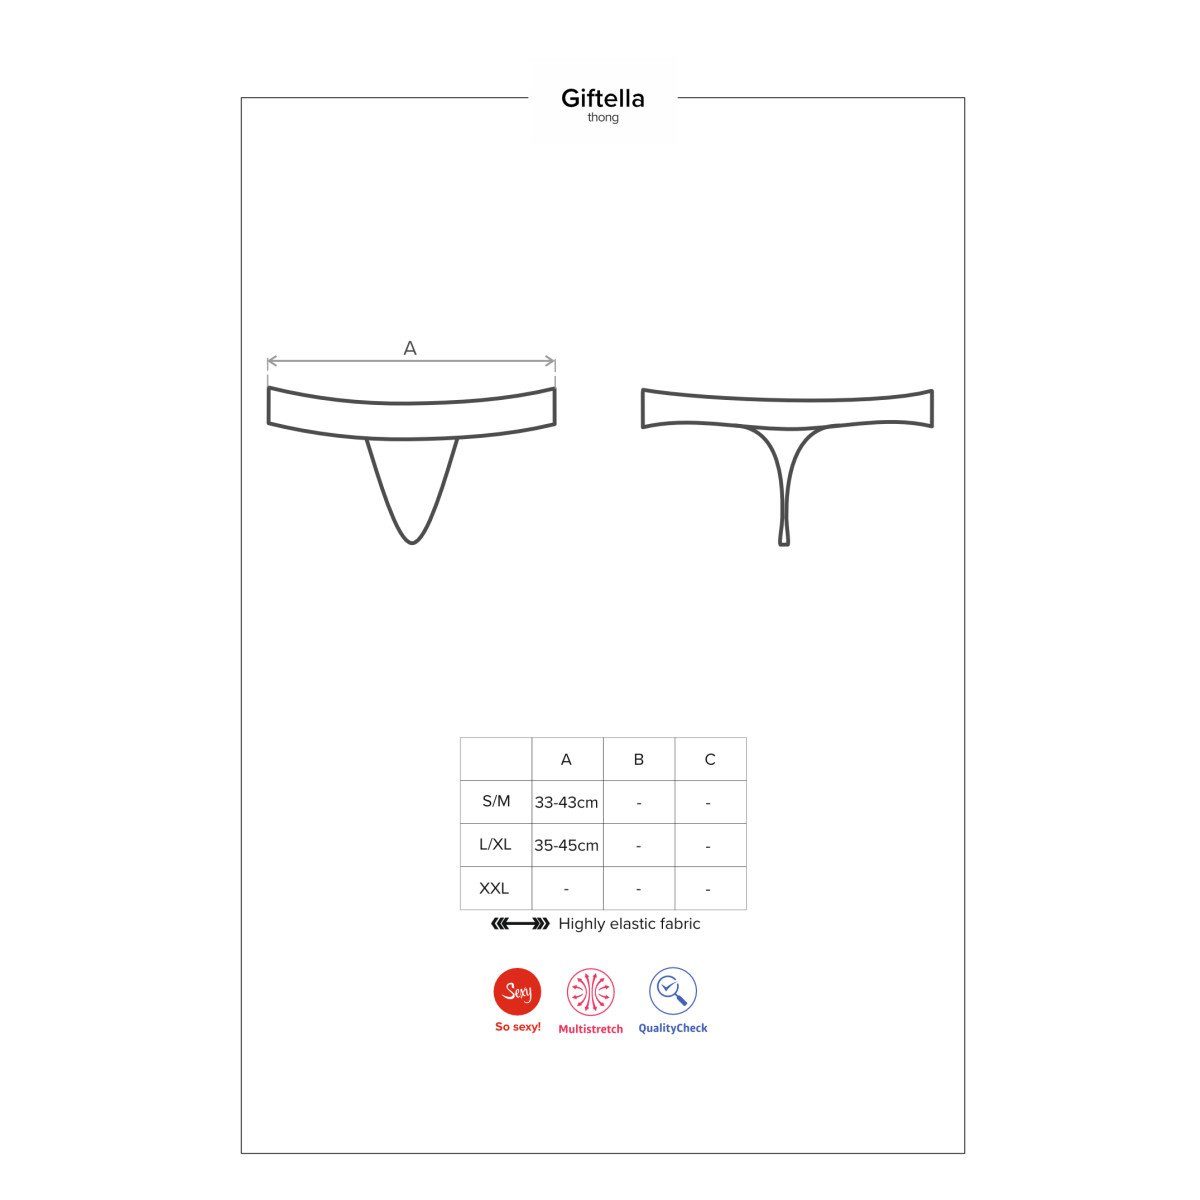 Obsessive Panty OB Giftella thong (L/XL,S/M) - red